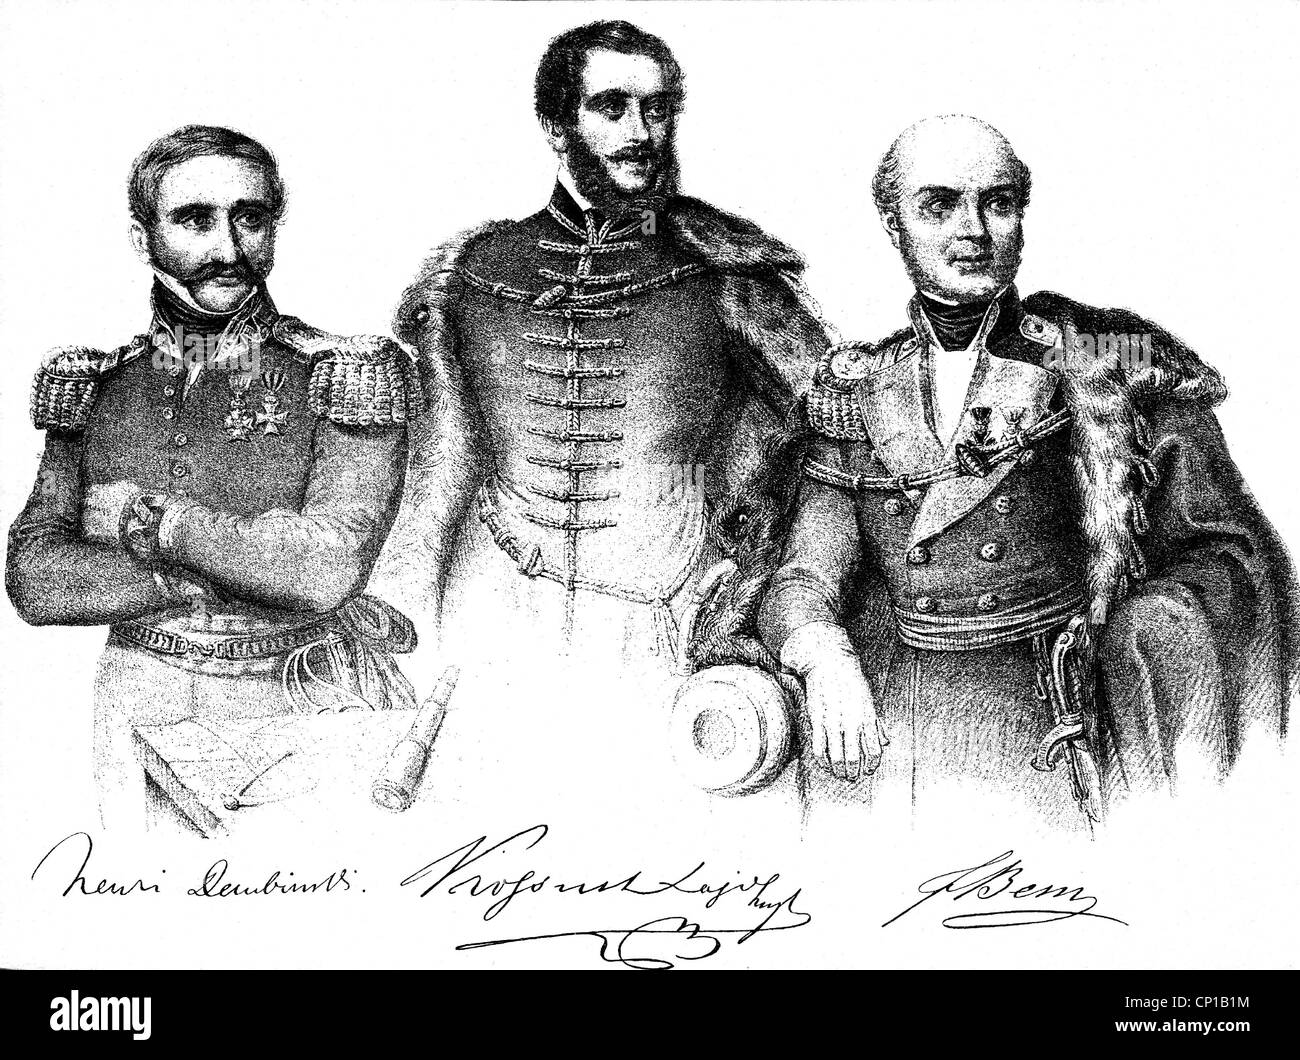 events, revolutions 1848 - 1849, uprising in Hungary 1849, leaders, from left to right: Henryk Dembinski, Lajos Kossuth, Jozef Bem, lithograph by L. Werch after drawing by Kurowski, 1849, military, general, politician, politicians, signature, leader, uniform, half length, revolution, 19th century, historic, historical, people, Additional-Rights-Clearences-Not Available Stock Photo